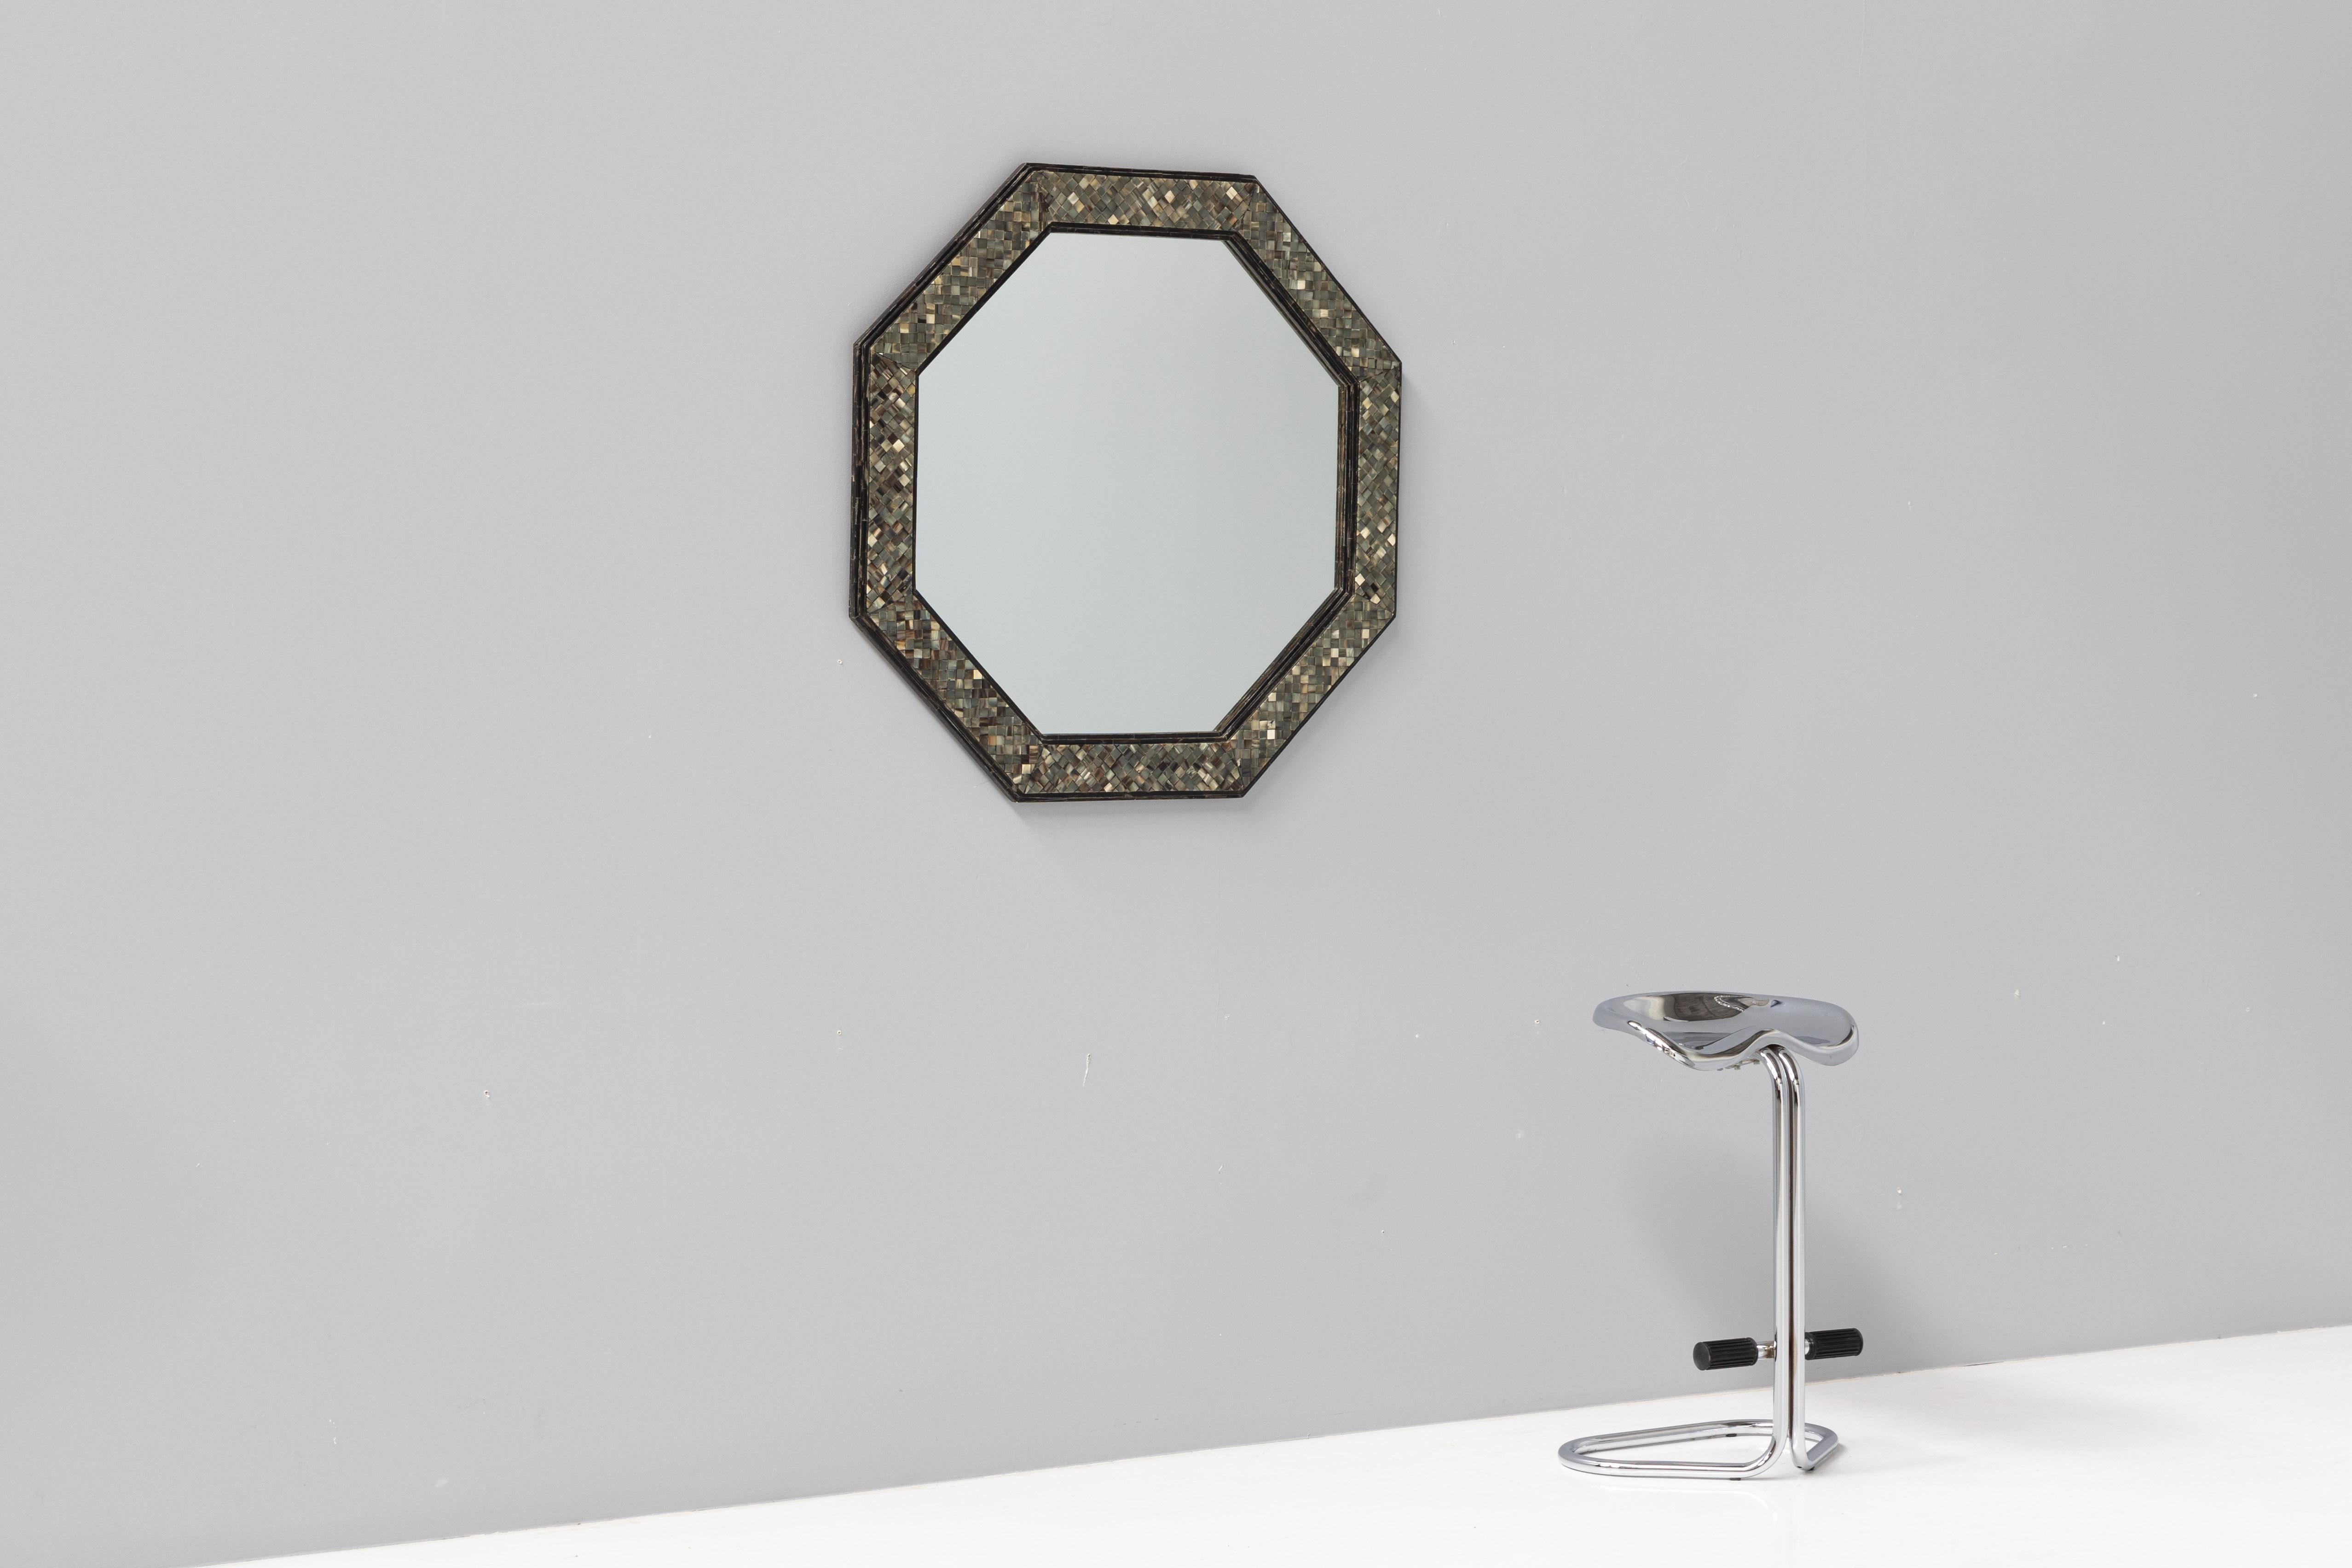 Octagonal mirror featuring a stunning horn mosaic inlay, crafted by Belgian designer Roger Vanhevel in the 1970s. This chic mirror embodies high-end elegance, perfect for luxurious and sophisticated decors. A rare find, it showcases Vanhevel's